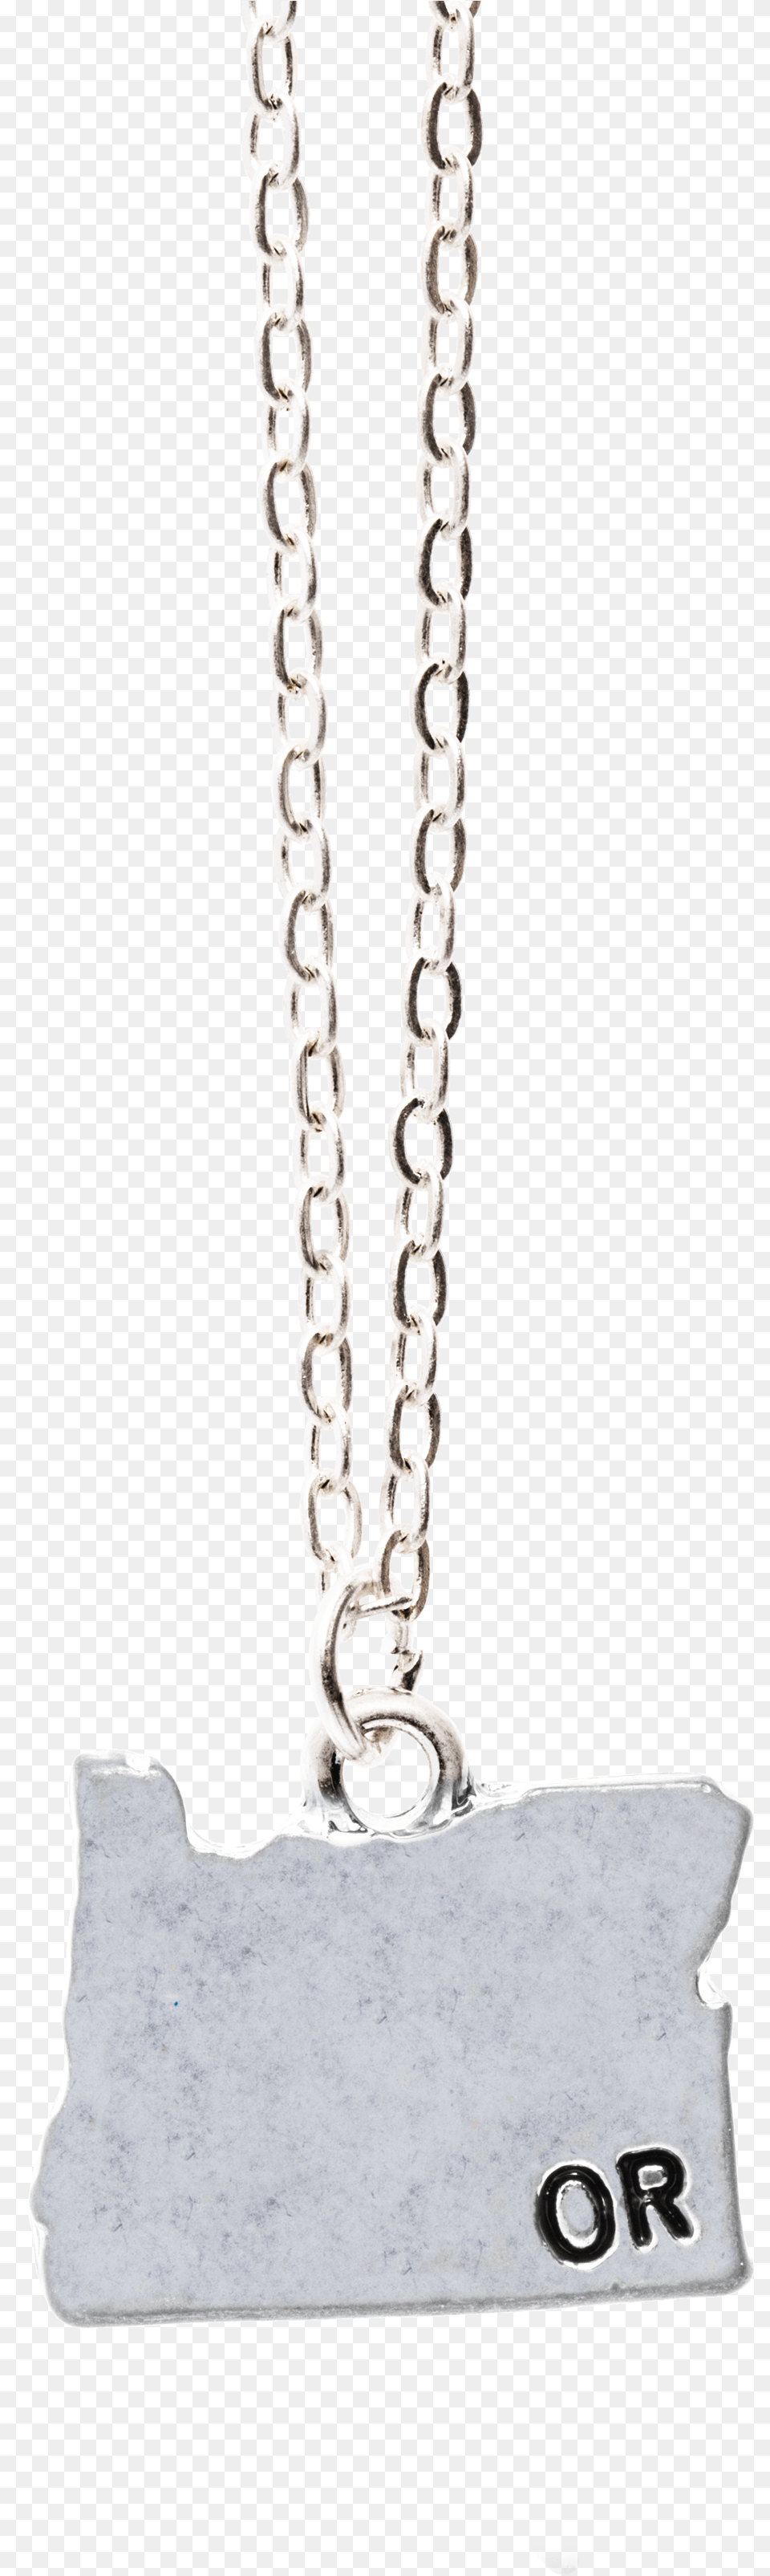 Chain, Accessories, Jewelry, Necklace, Bag Png Image